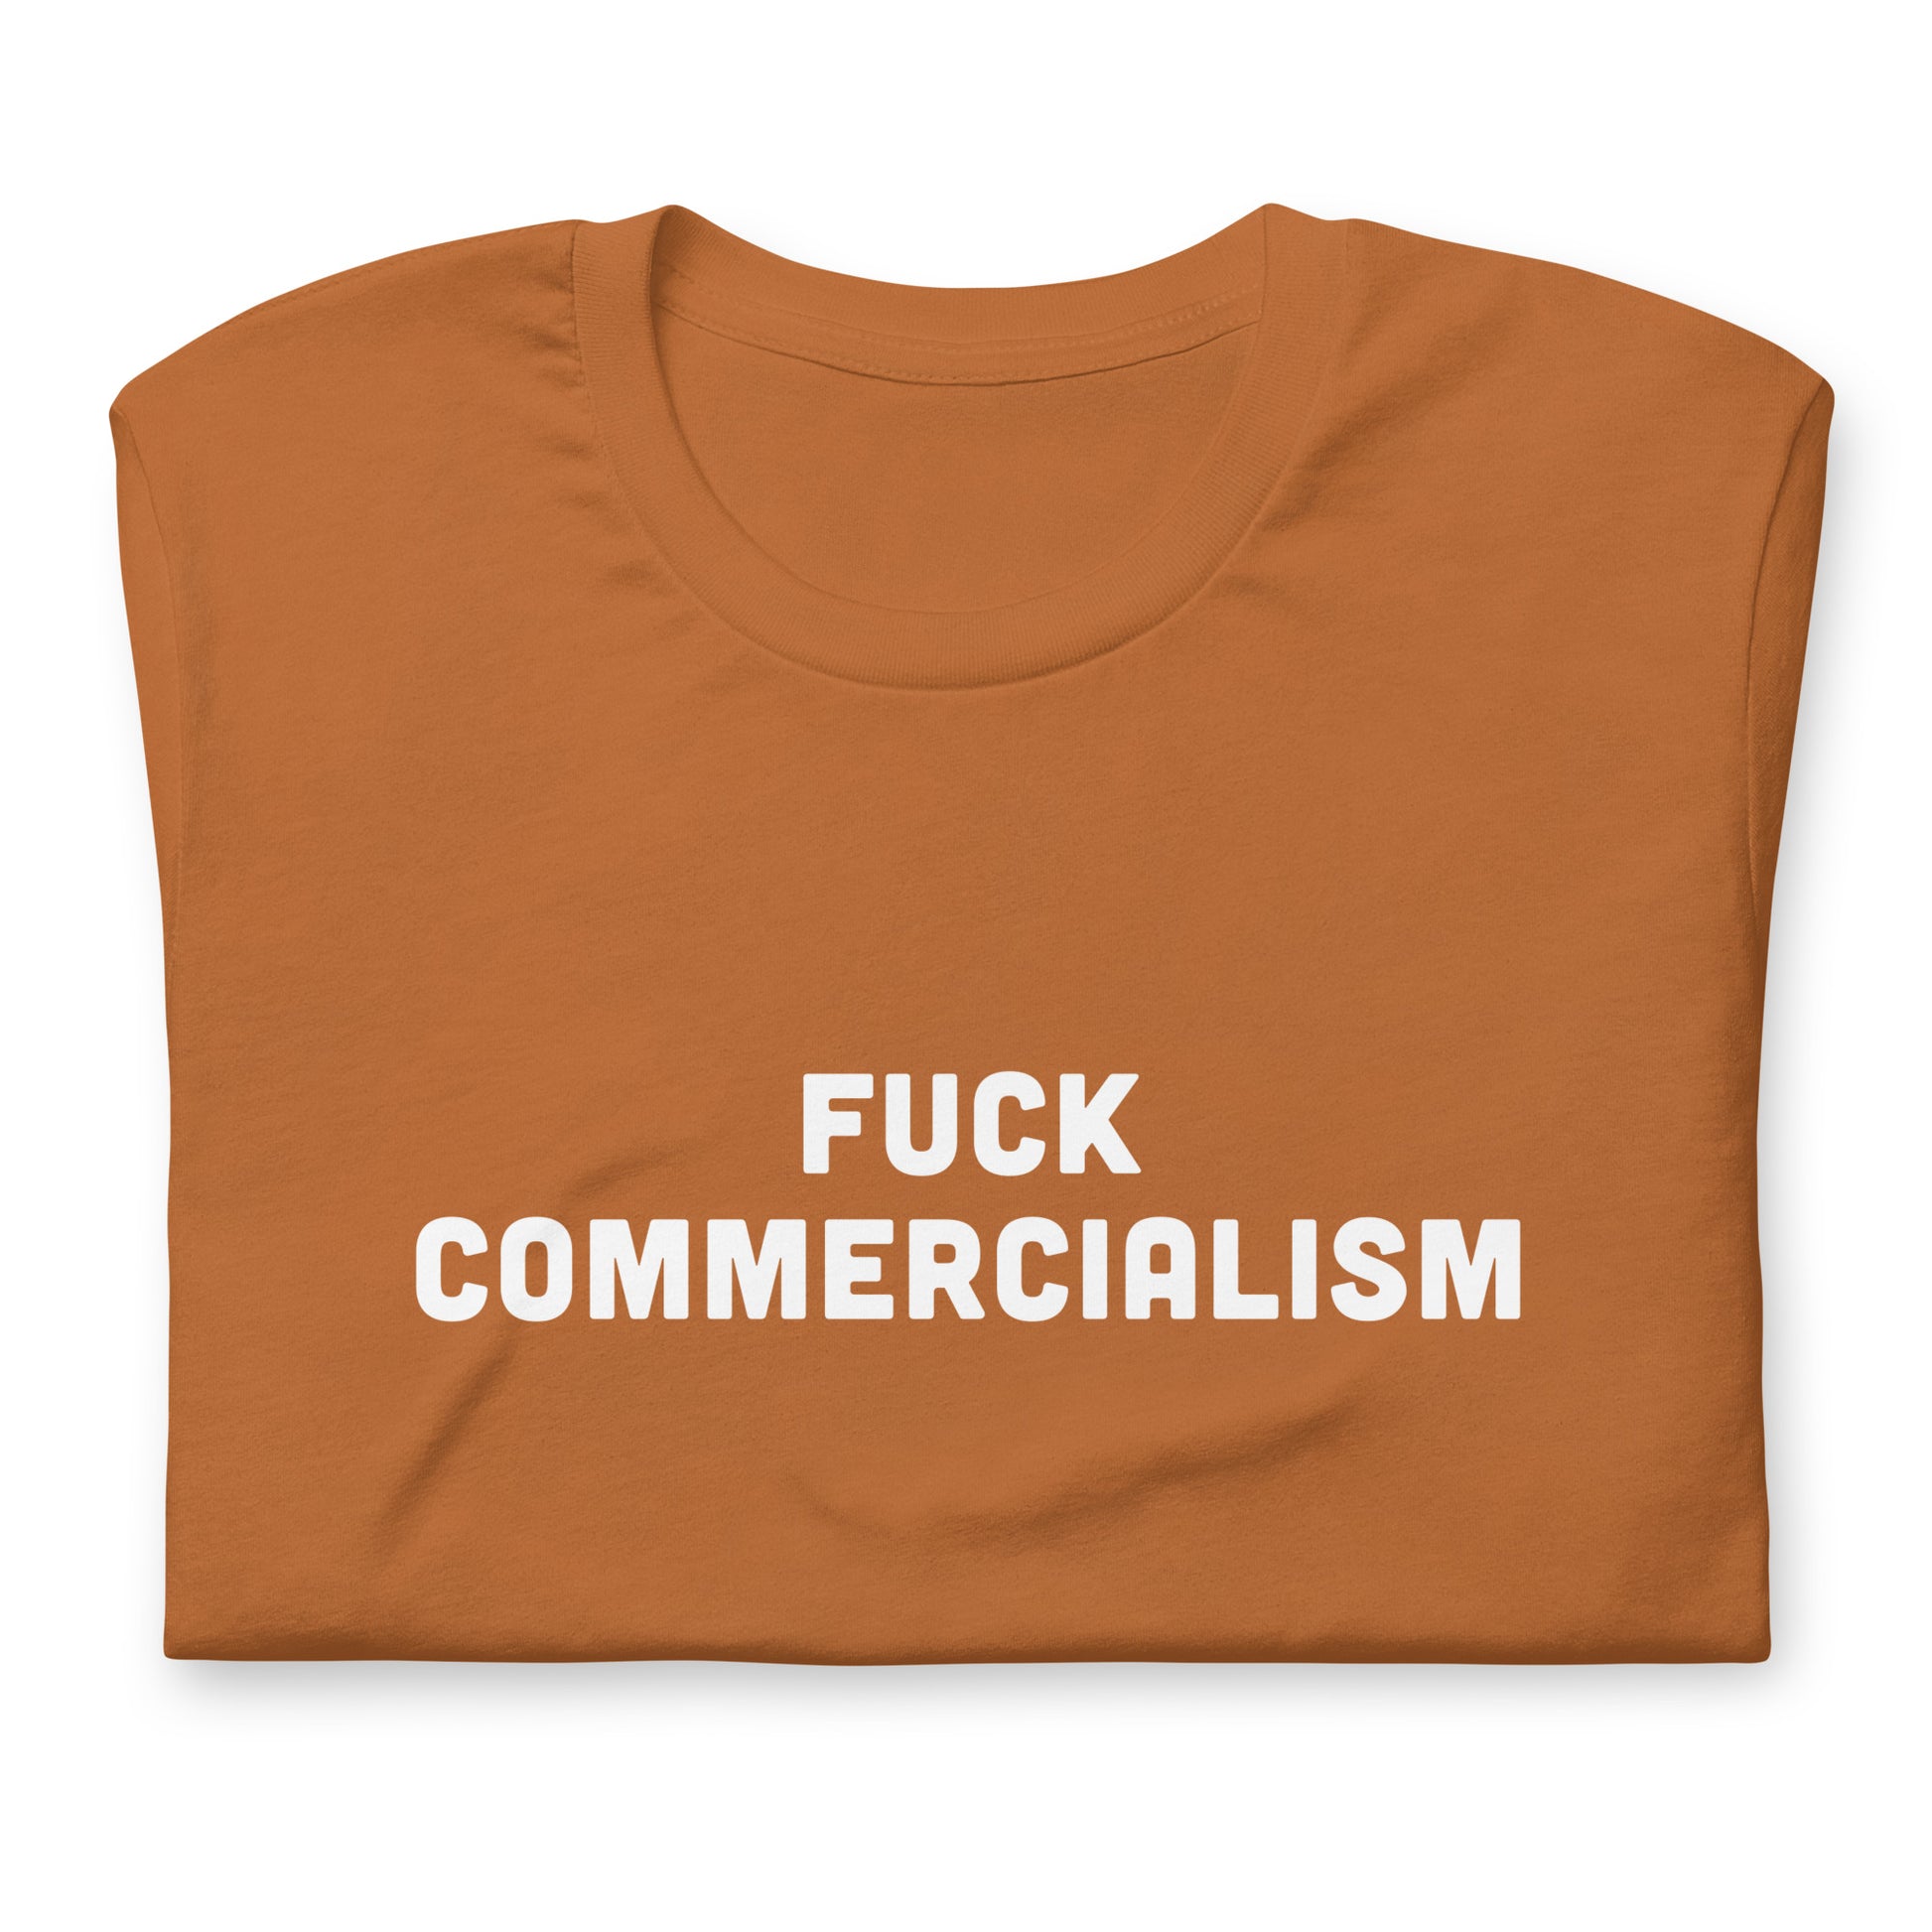 Fuck Commercialism T-Shirt Size XL Color Navy